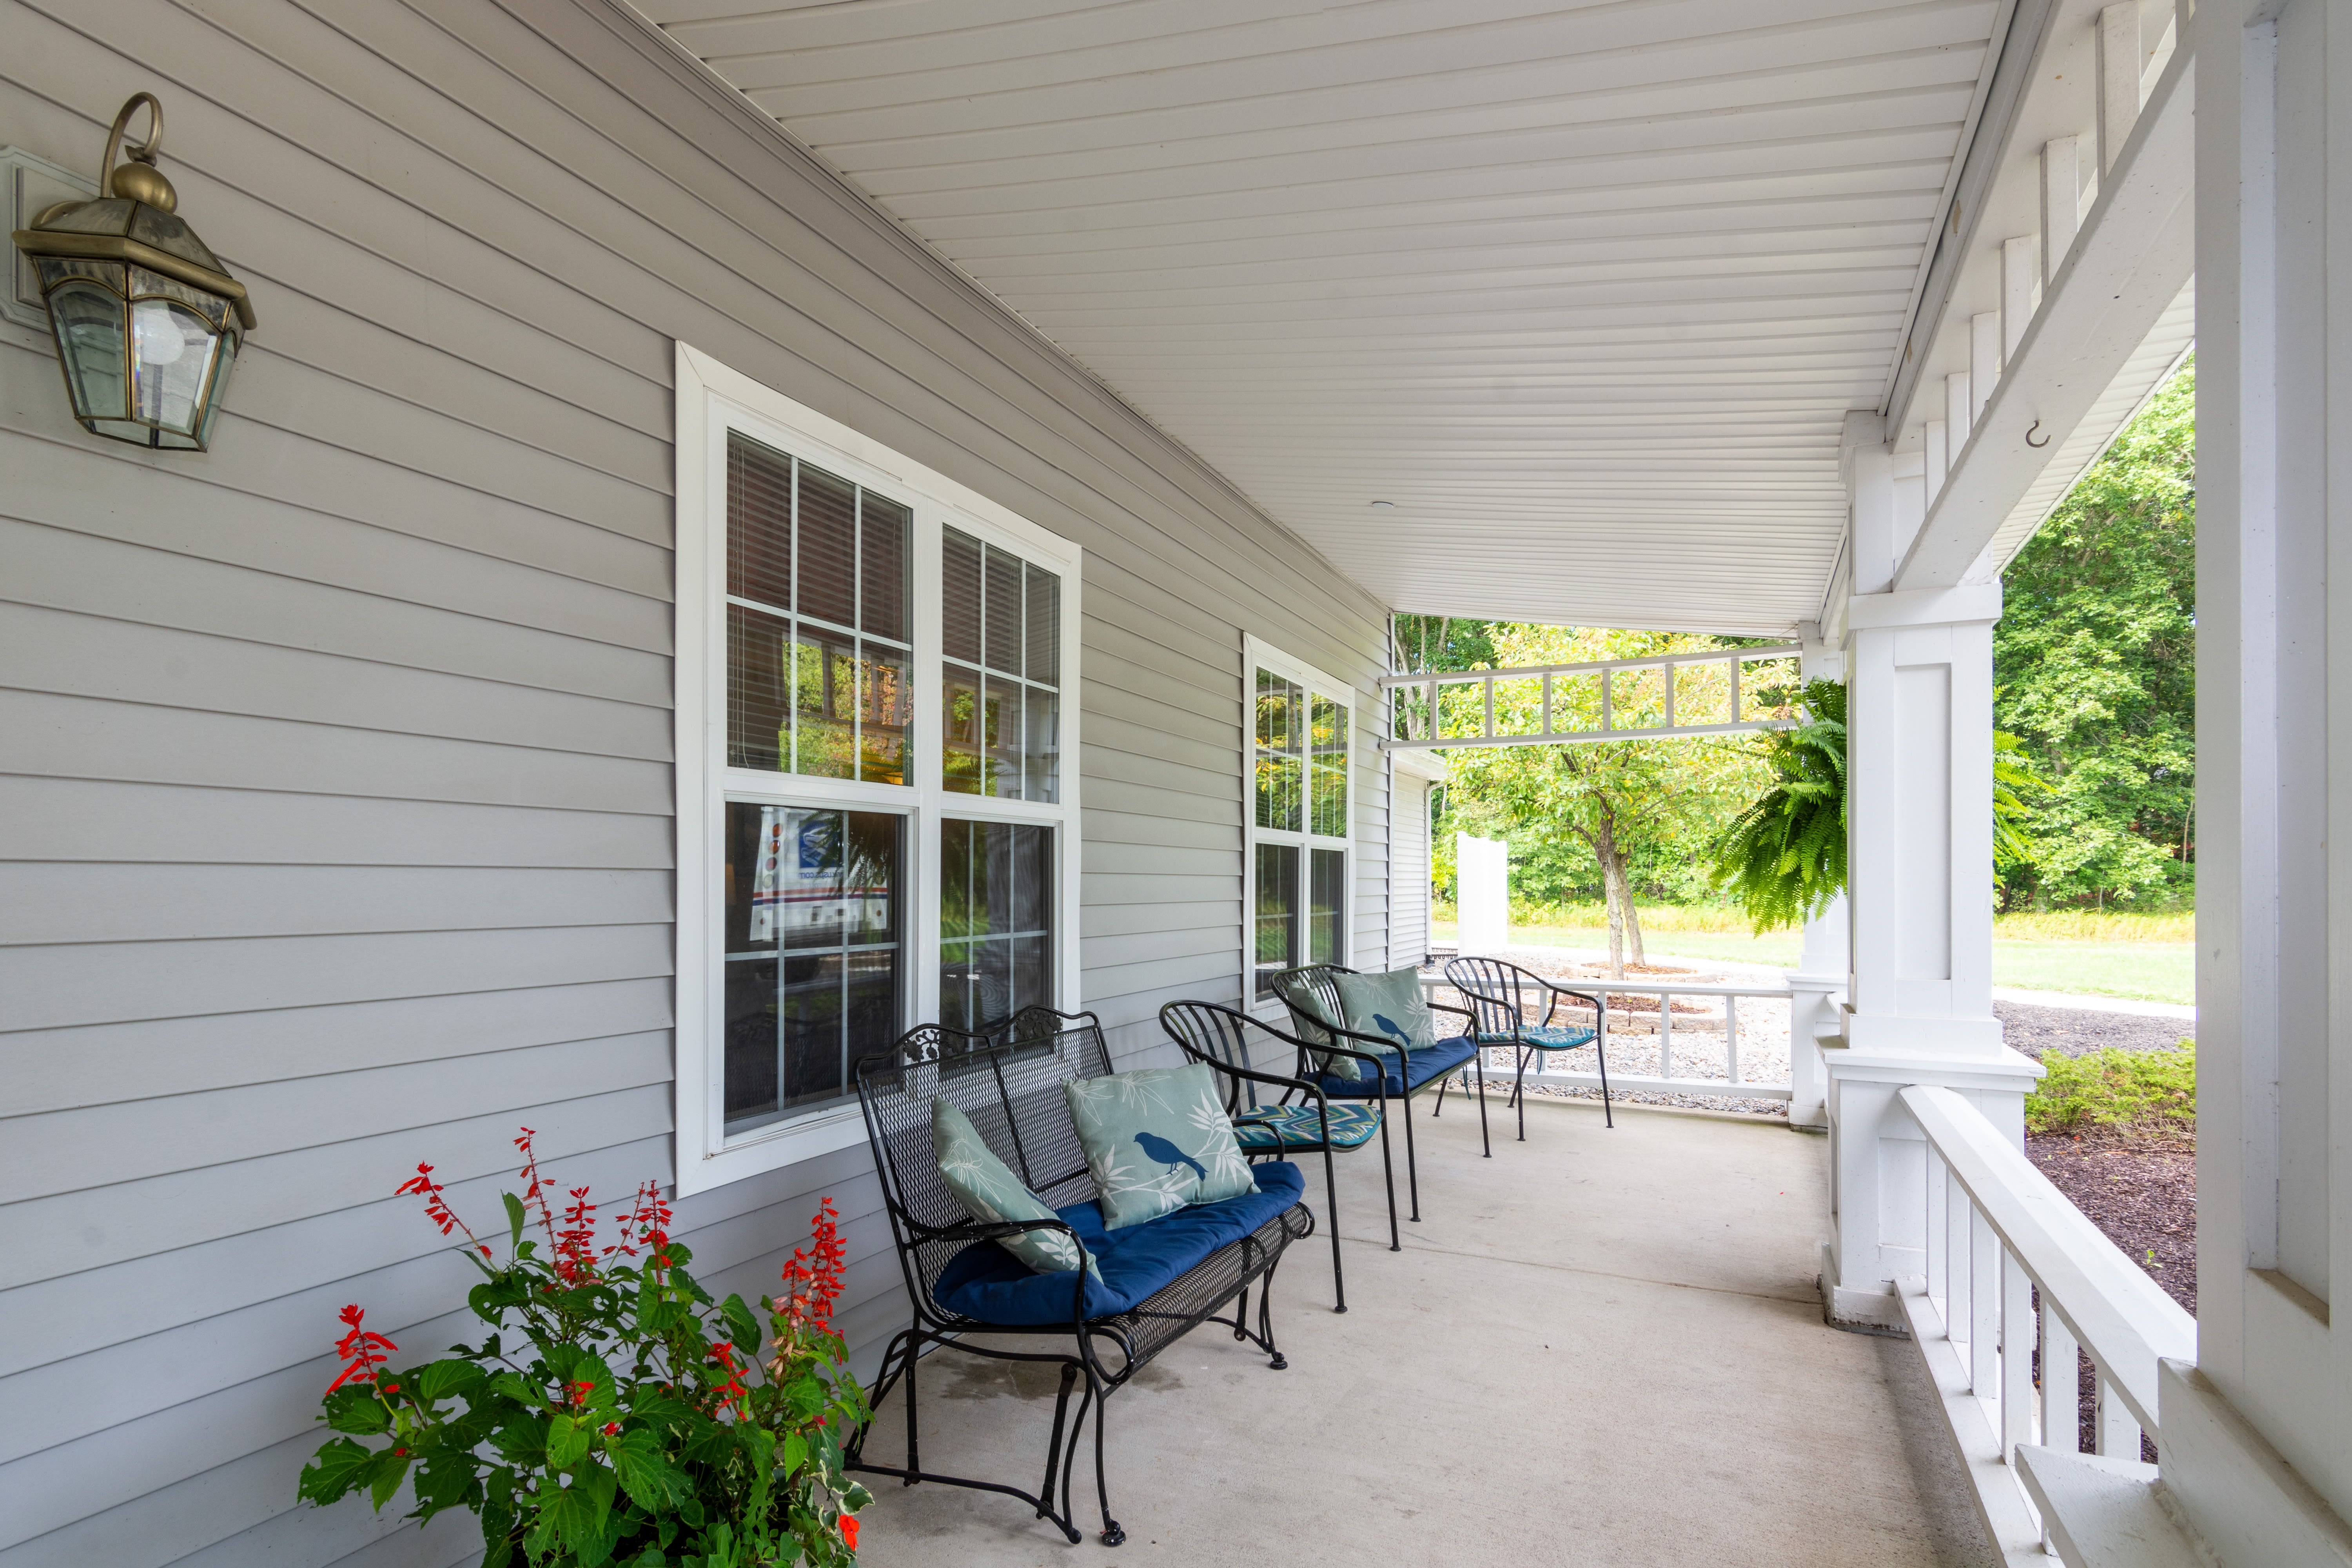 Outdoor porch seating at Trustwell Living at Kingsbury Place in Defiance, Ohio